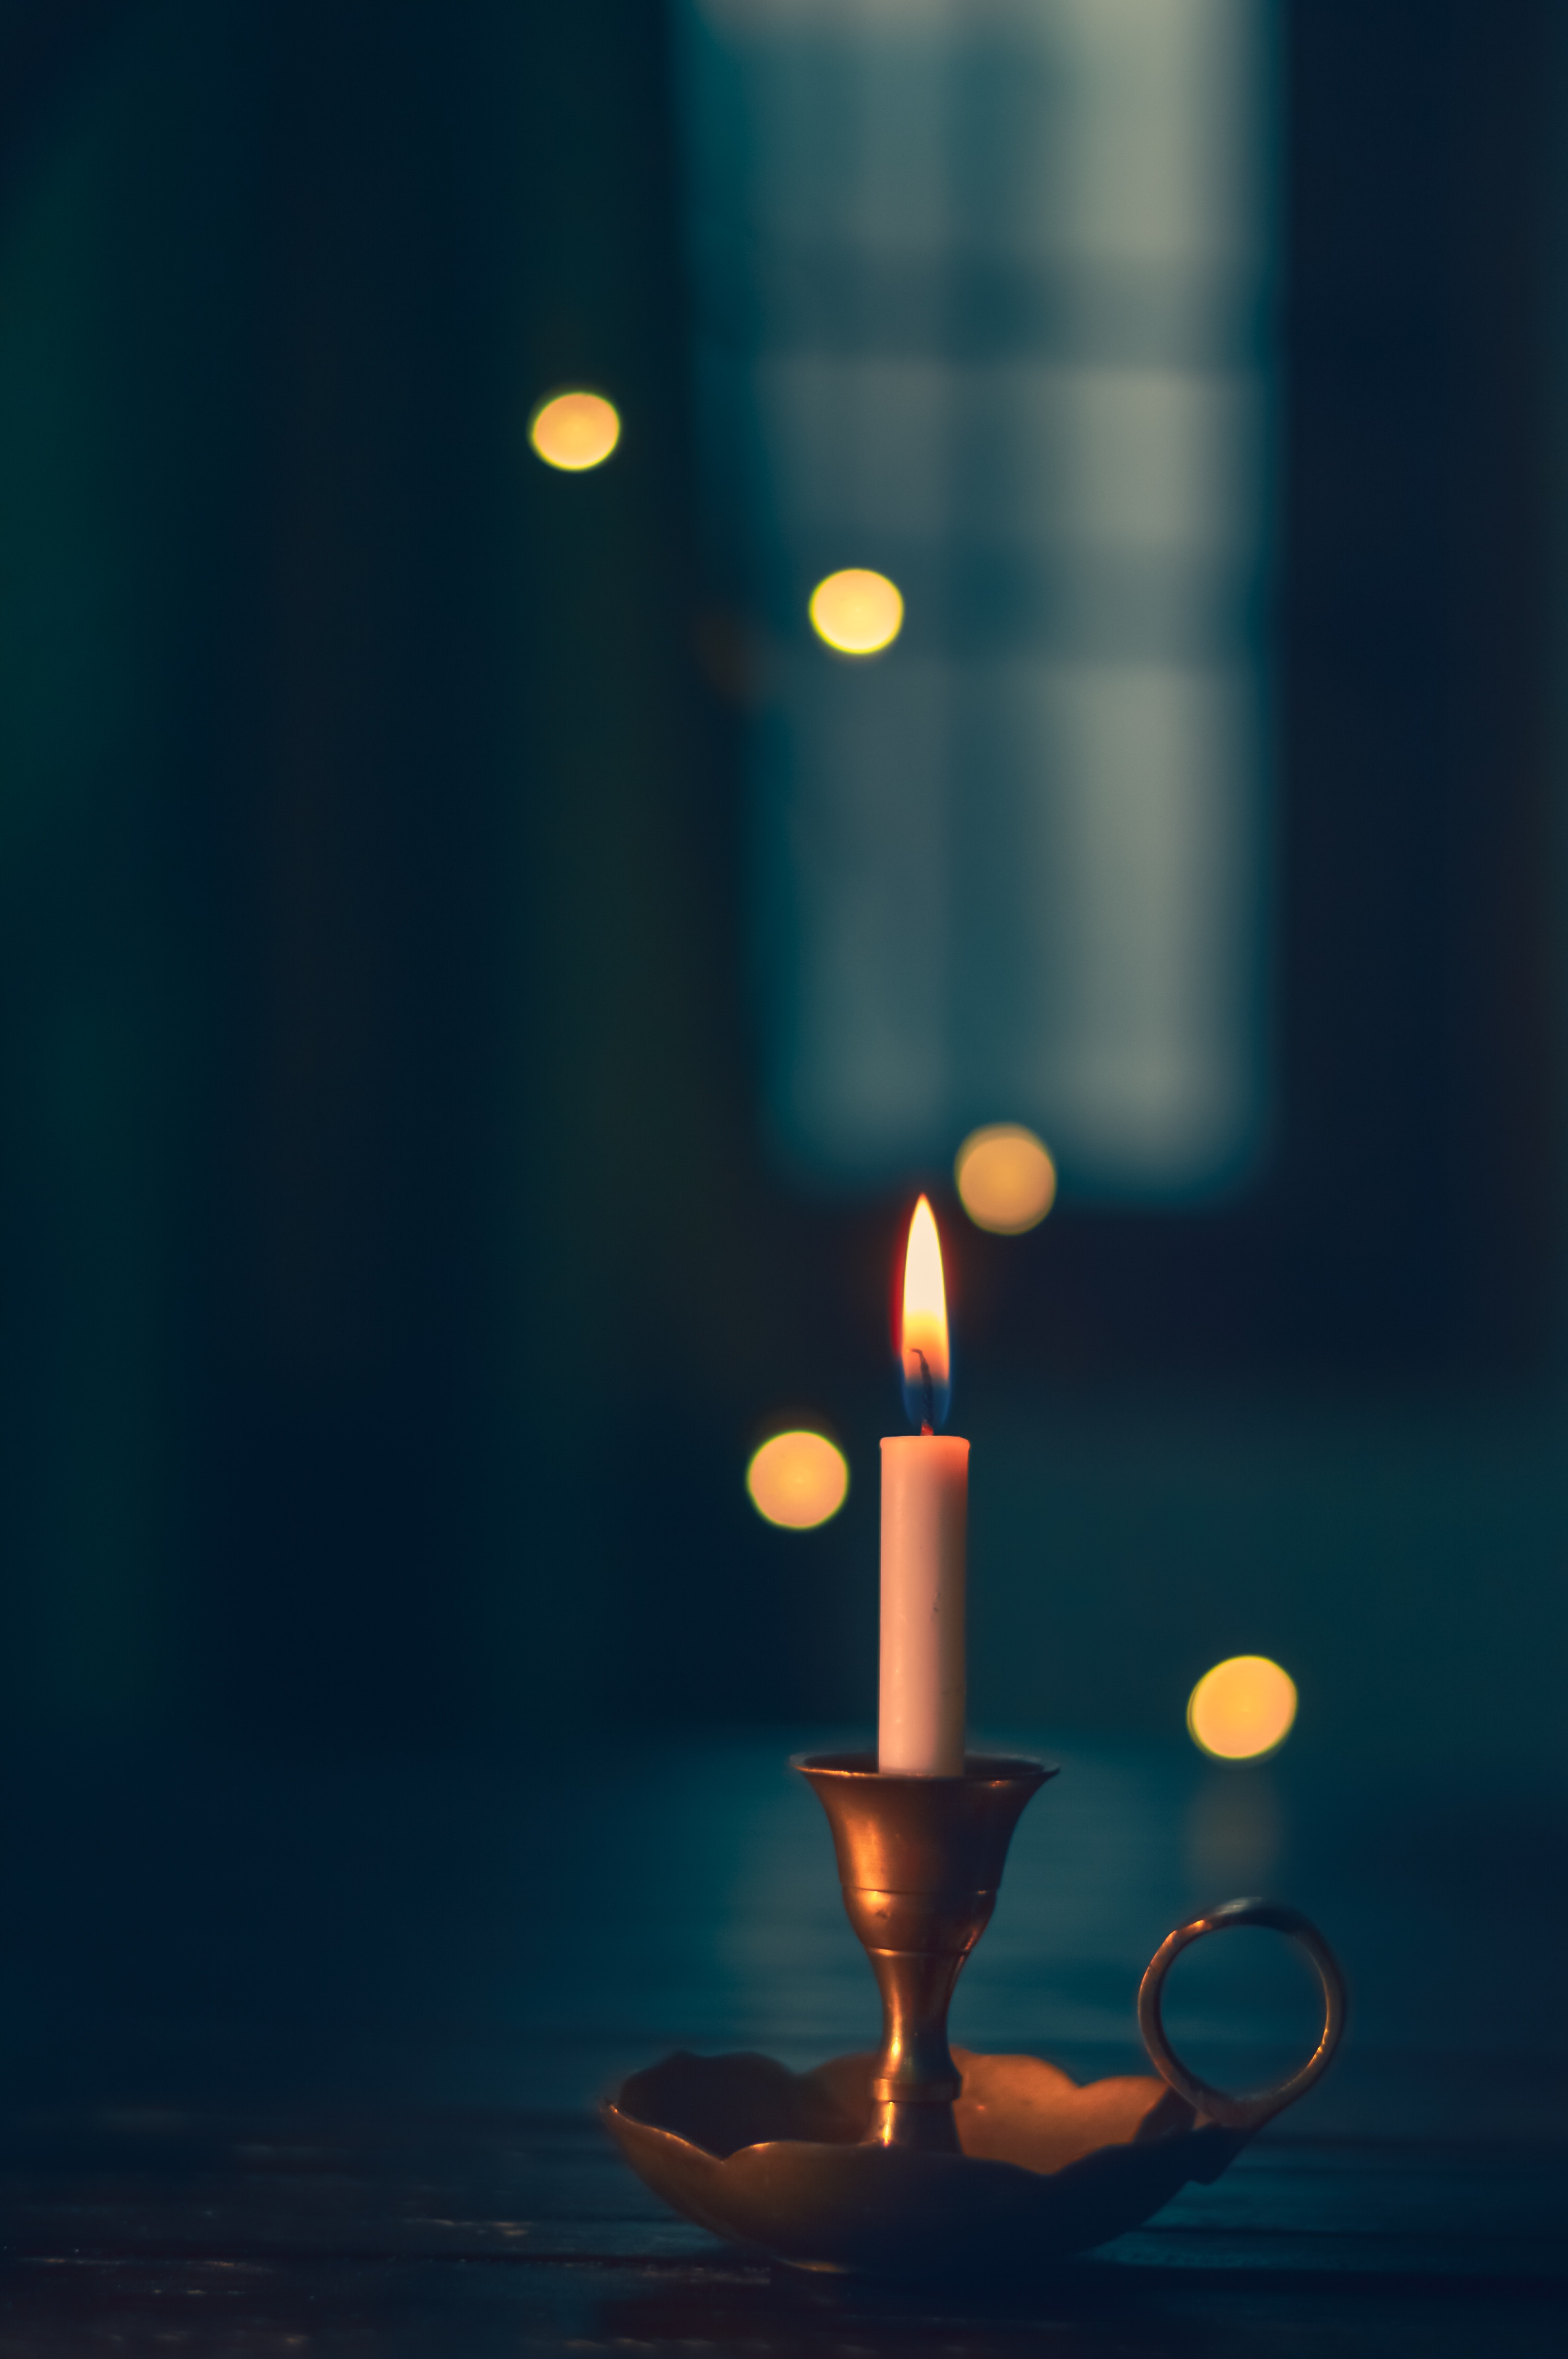 blur, miscellanea, candle, fire, wax, miscellaneous, smooth, wick, candlestick 8K